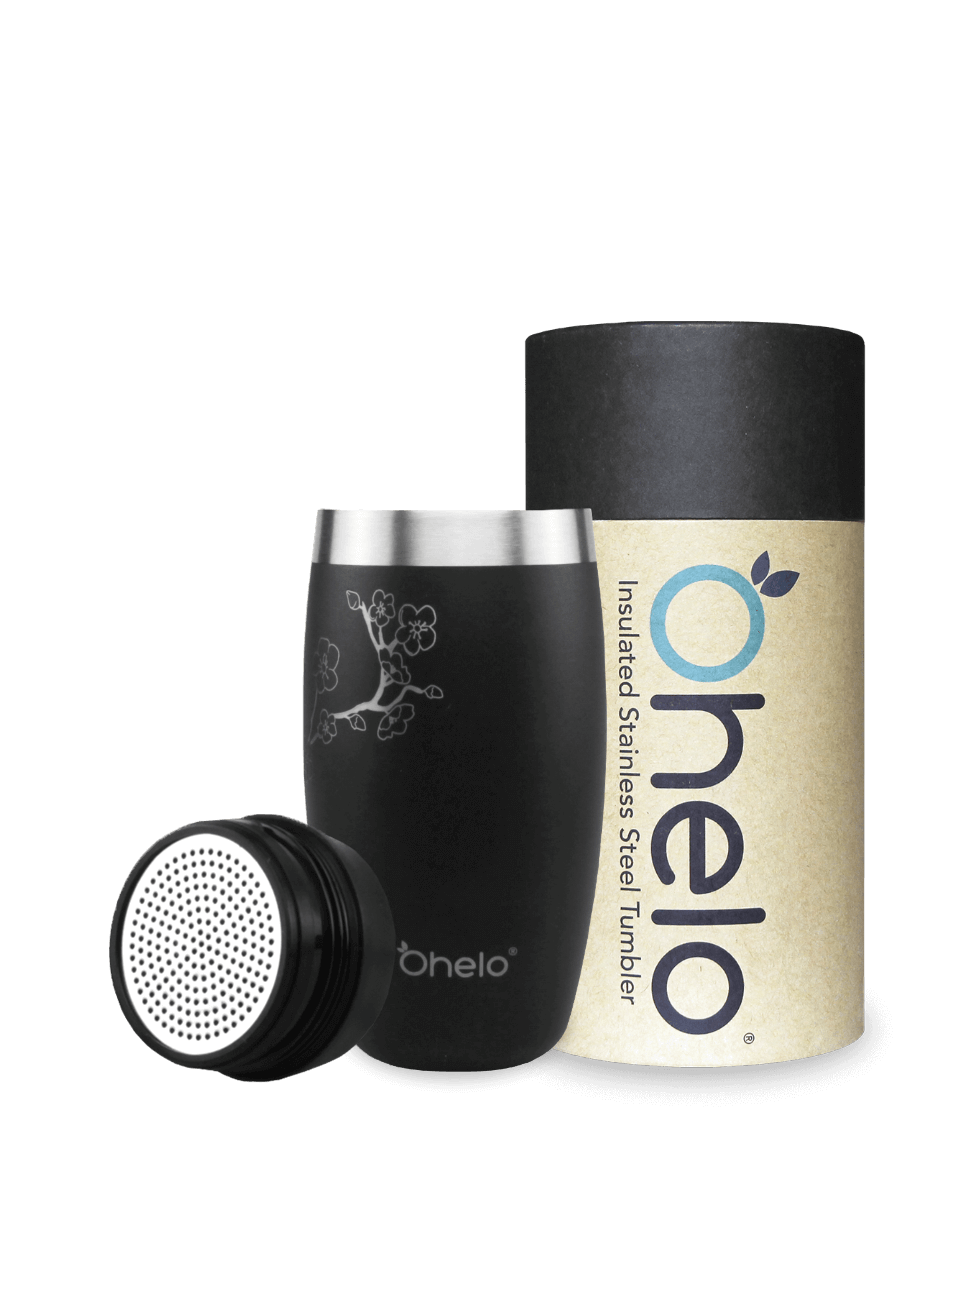 Ohelo insulated tumbler in black cherry blossom design with recycled packaging